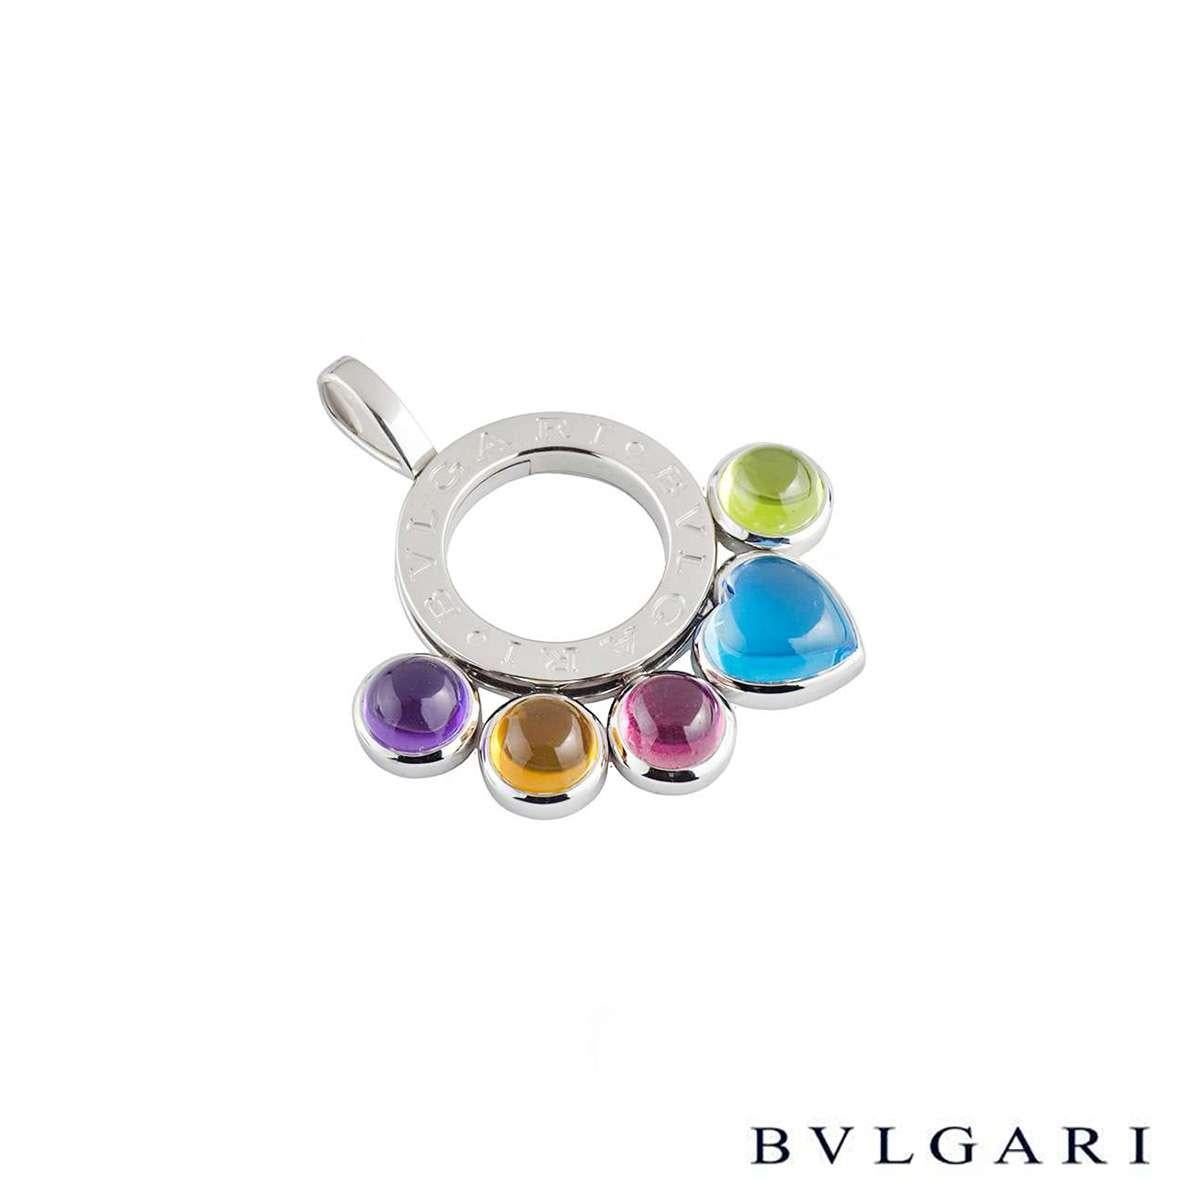 A colourful 18k white gold Bvlgari pendant from the Allegra collection. The pendant is composed of an open work circle motif, engraved with 'Bvlgari Bvlgari' throughout the centre. Suspended from the motif are 4 round cabochon cut multi-gemstones,